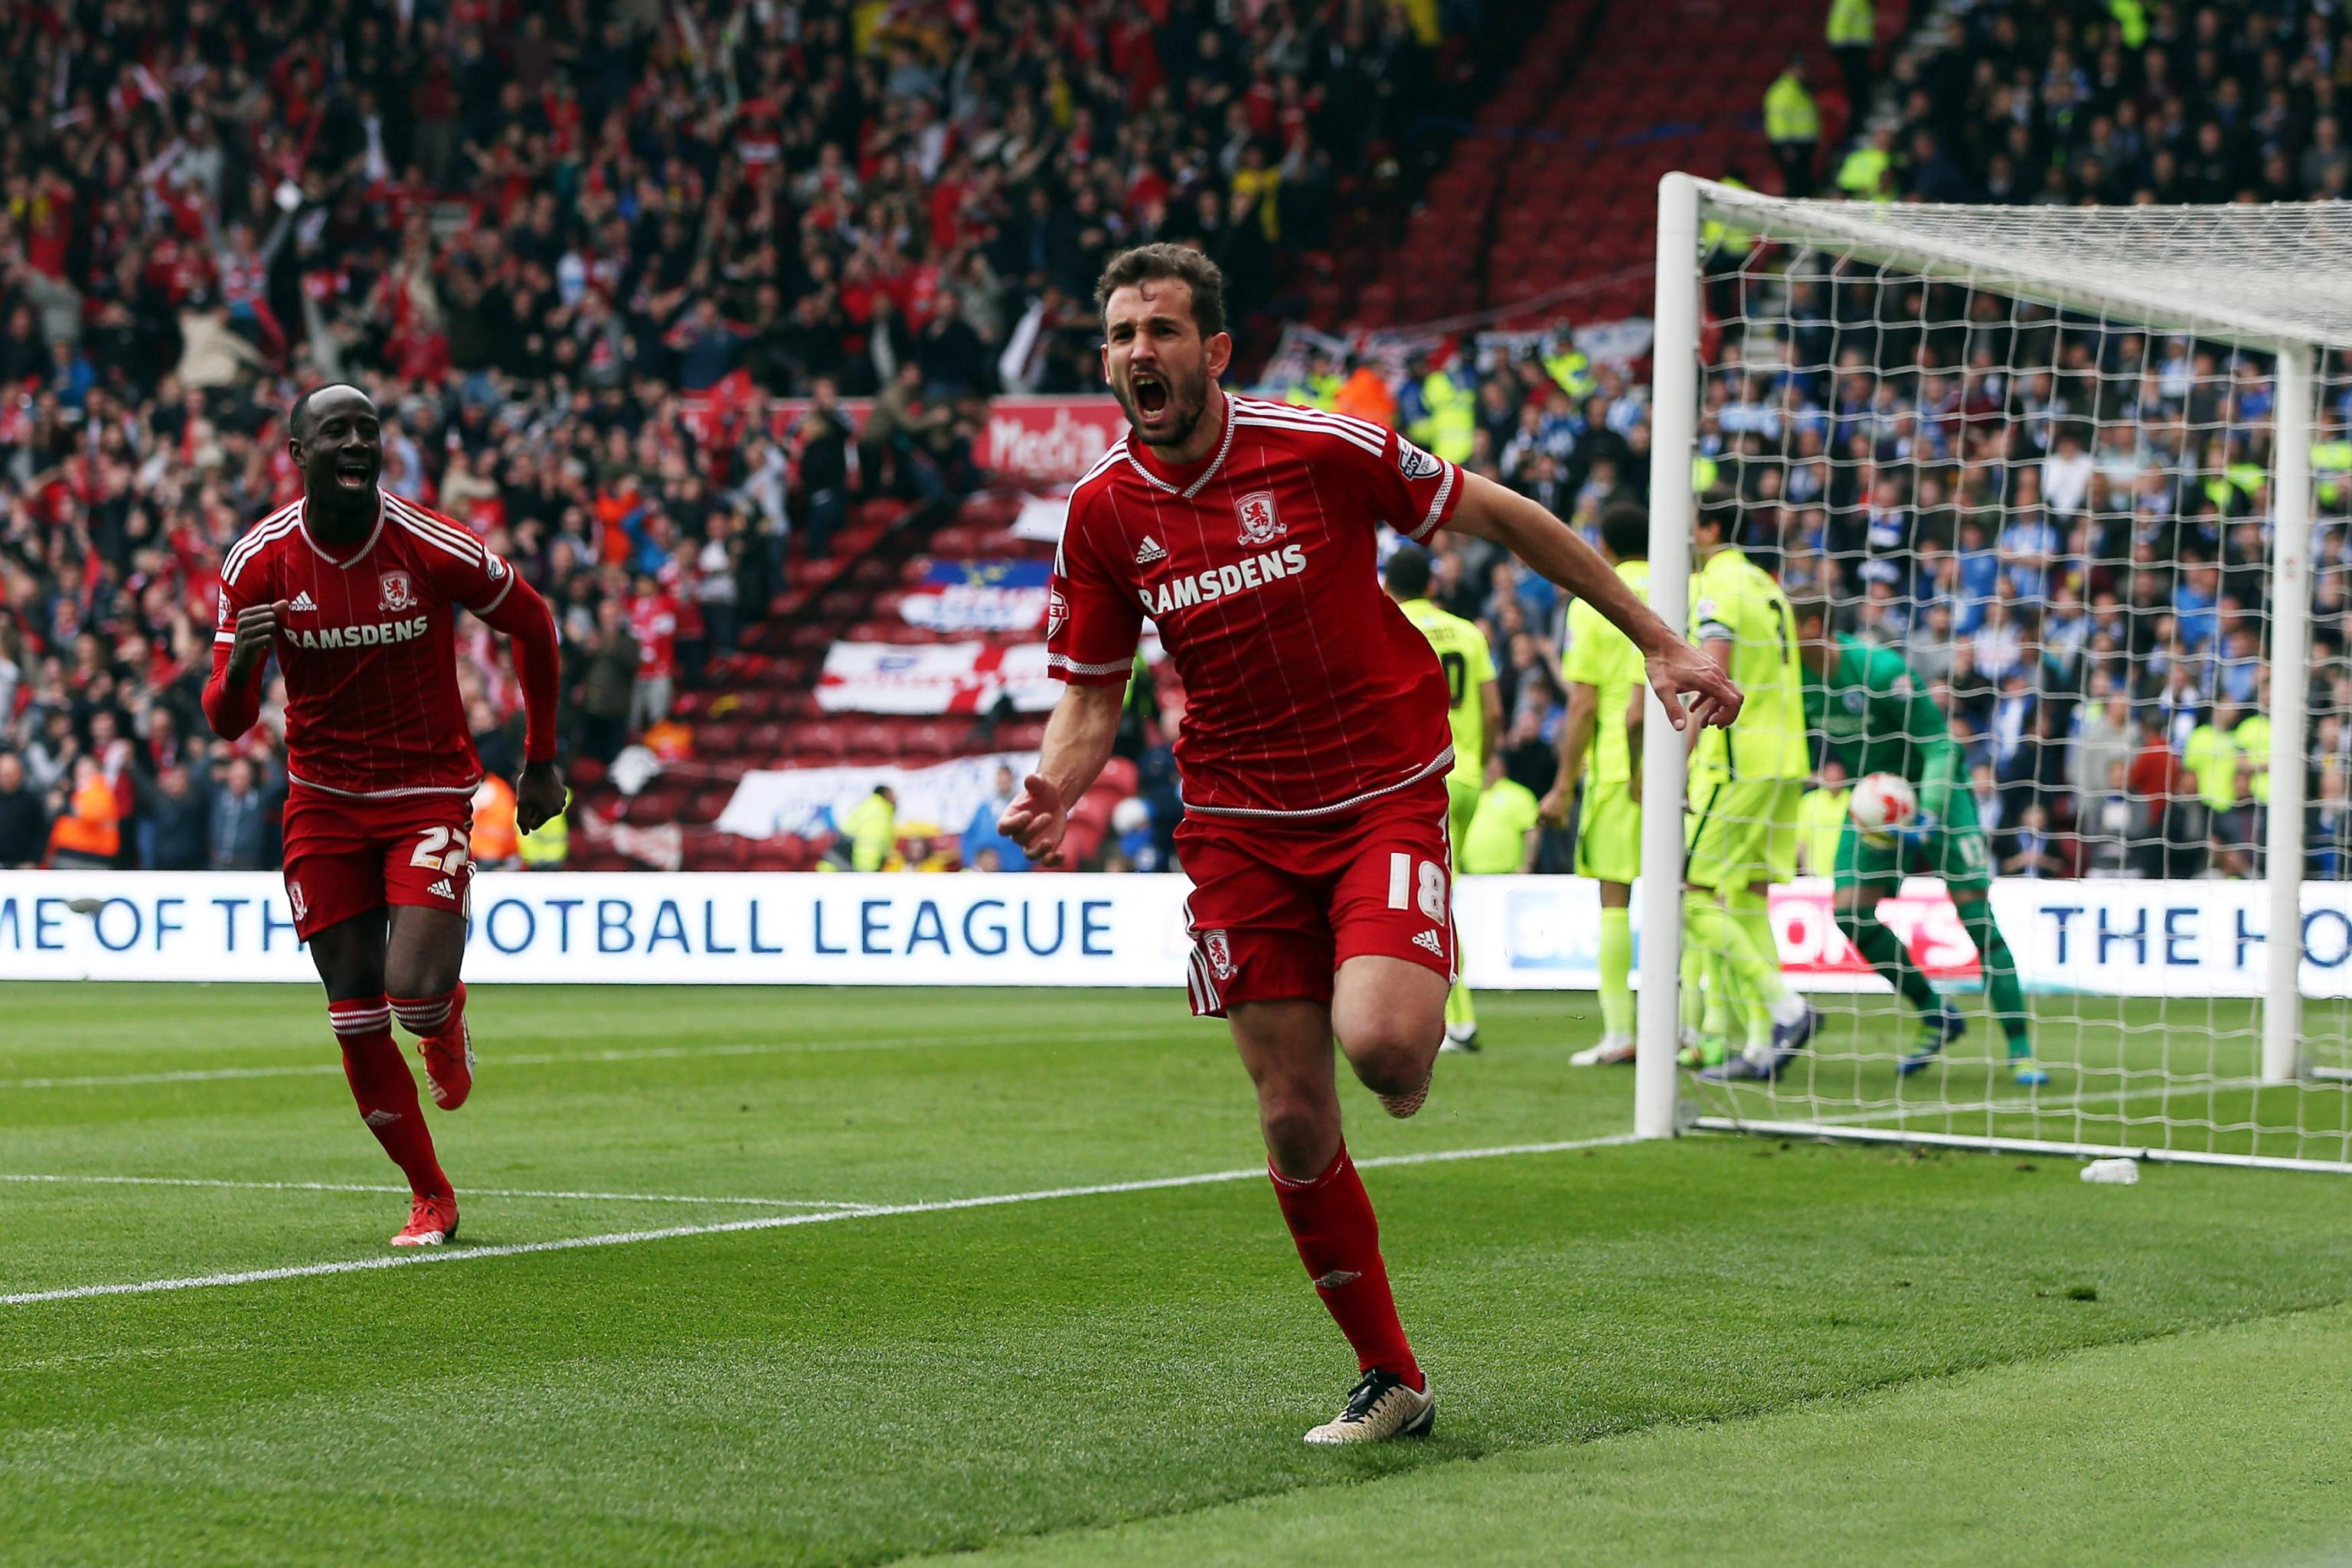 Middlesbrough 2-0 Cardiff City Highlights as Boro make it three